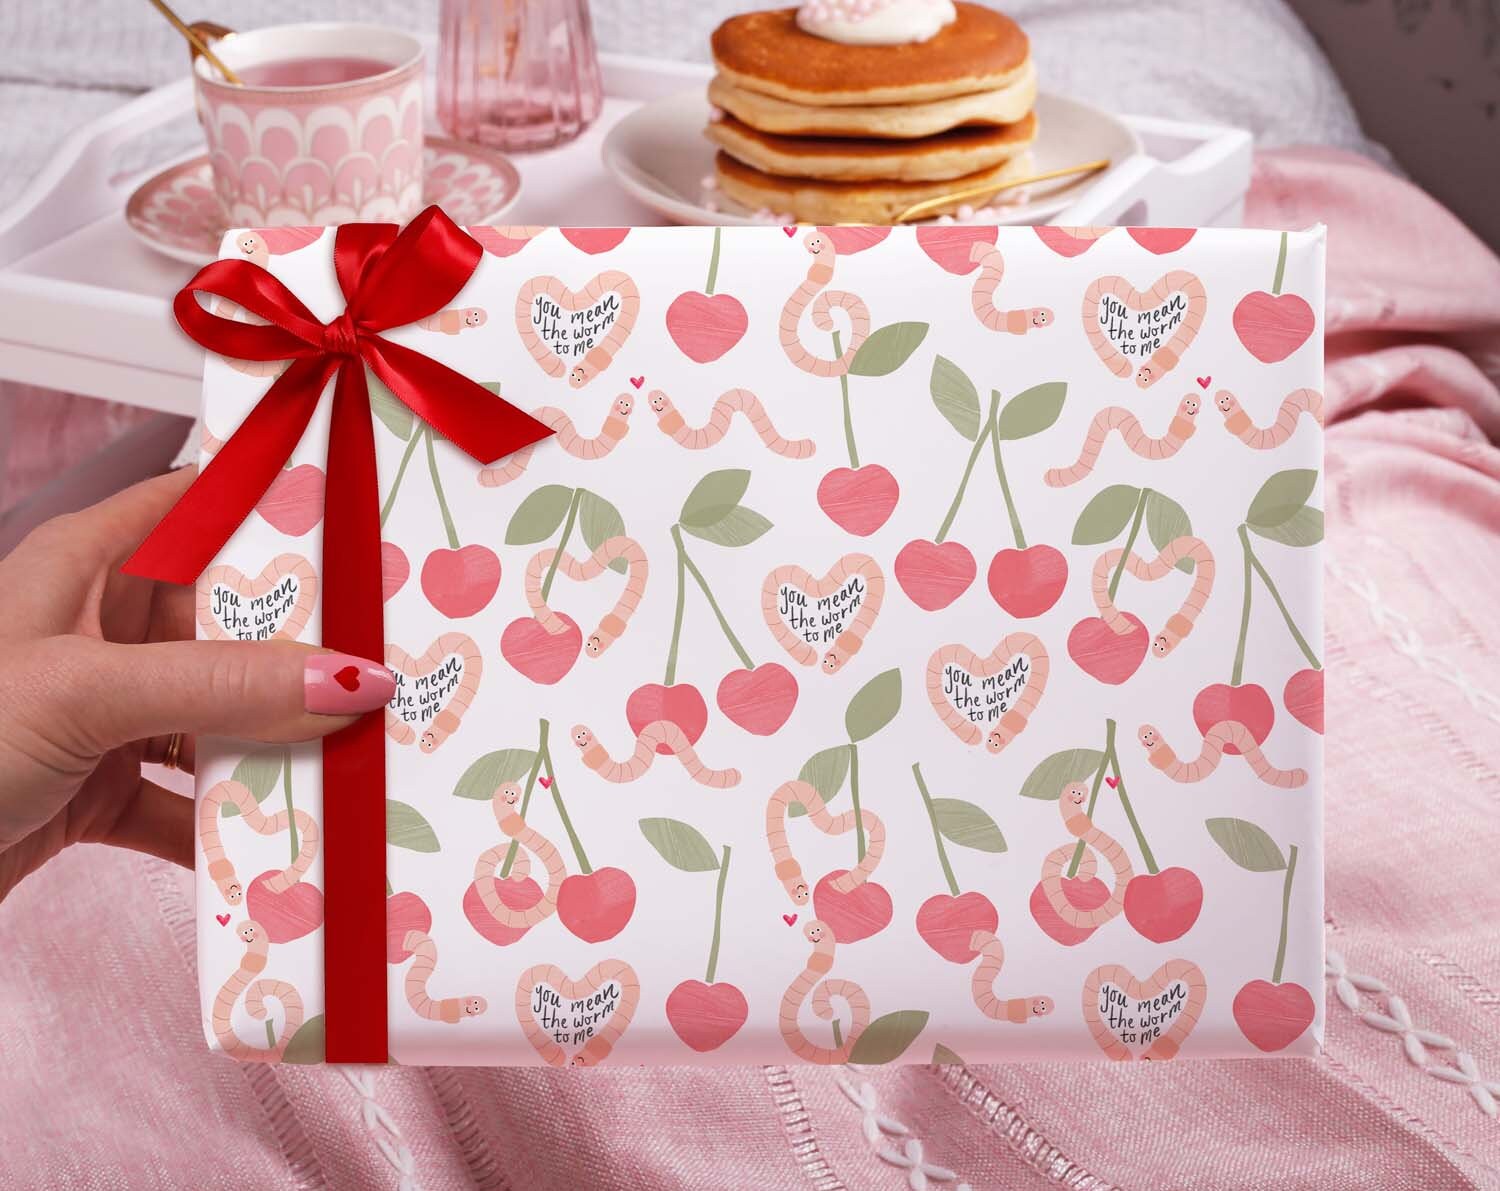 Cherry Gift Wrapping Paper for Her Or Him